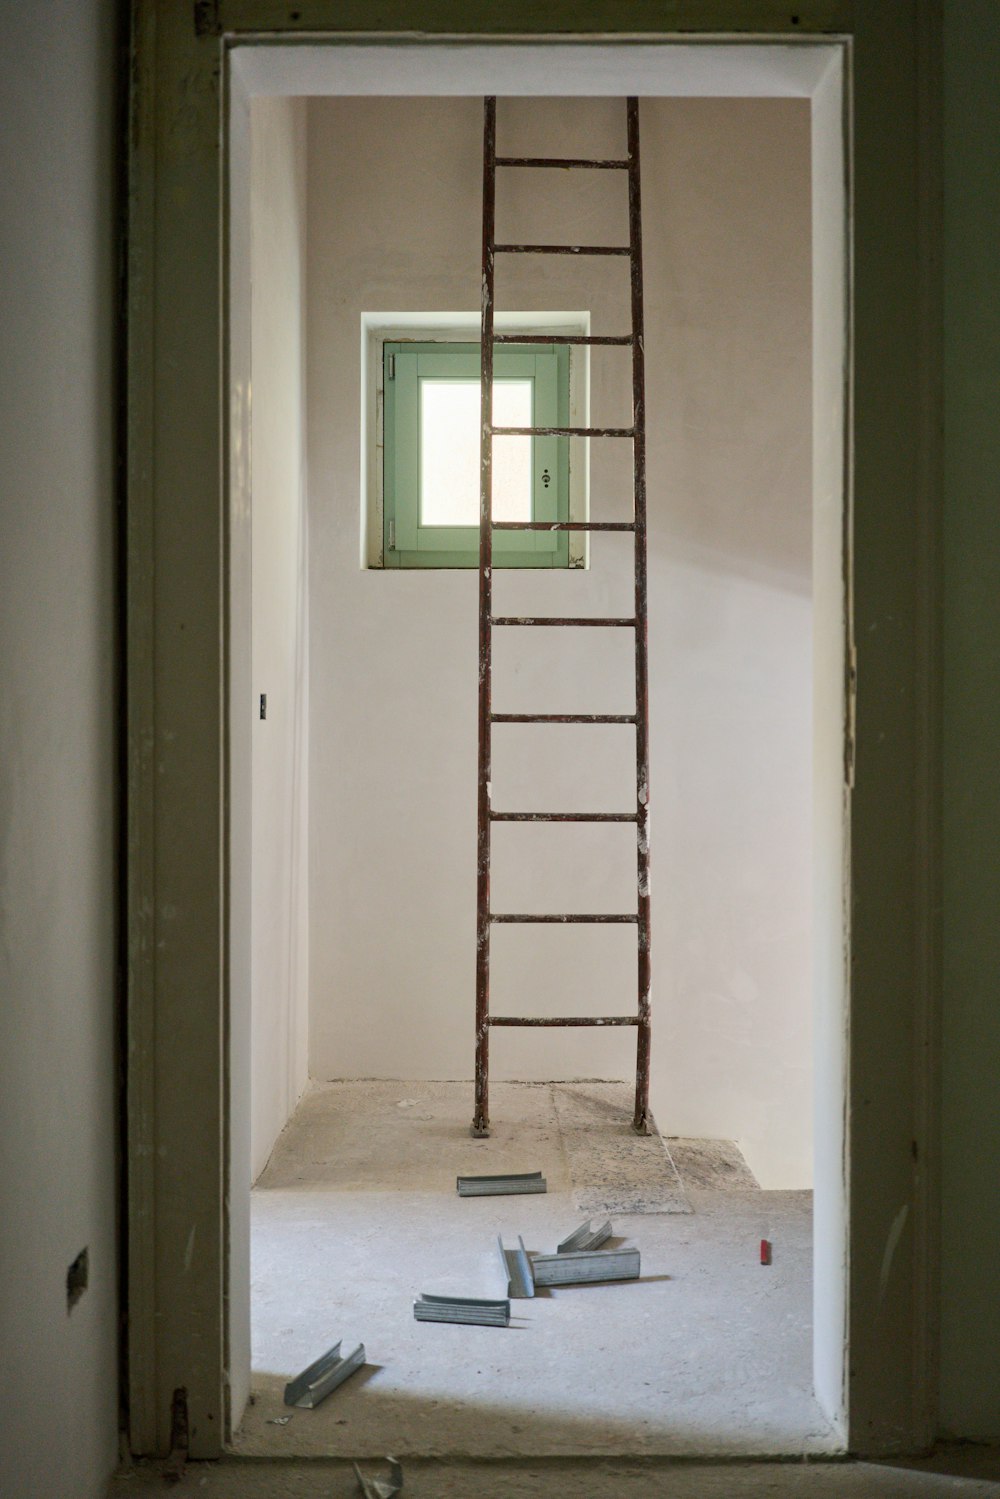 a ladder leaning up against a wall in a room